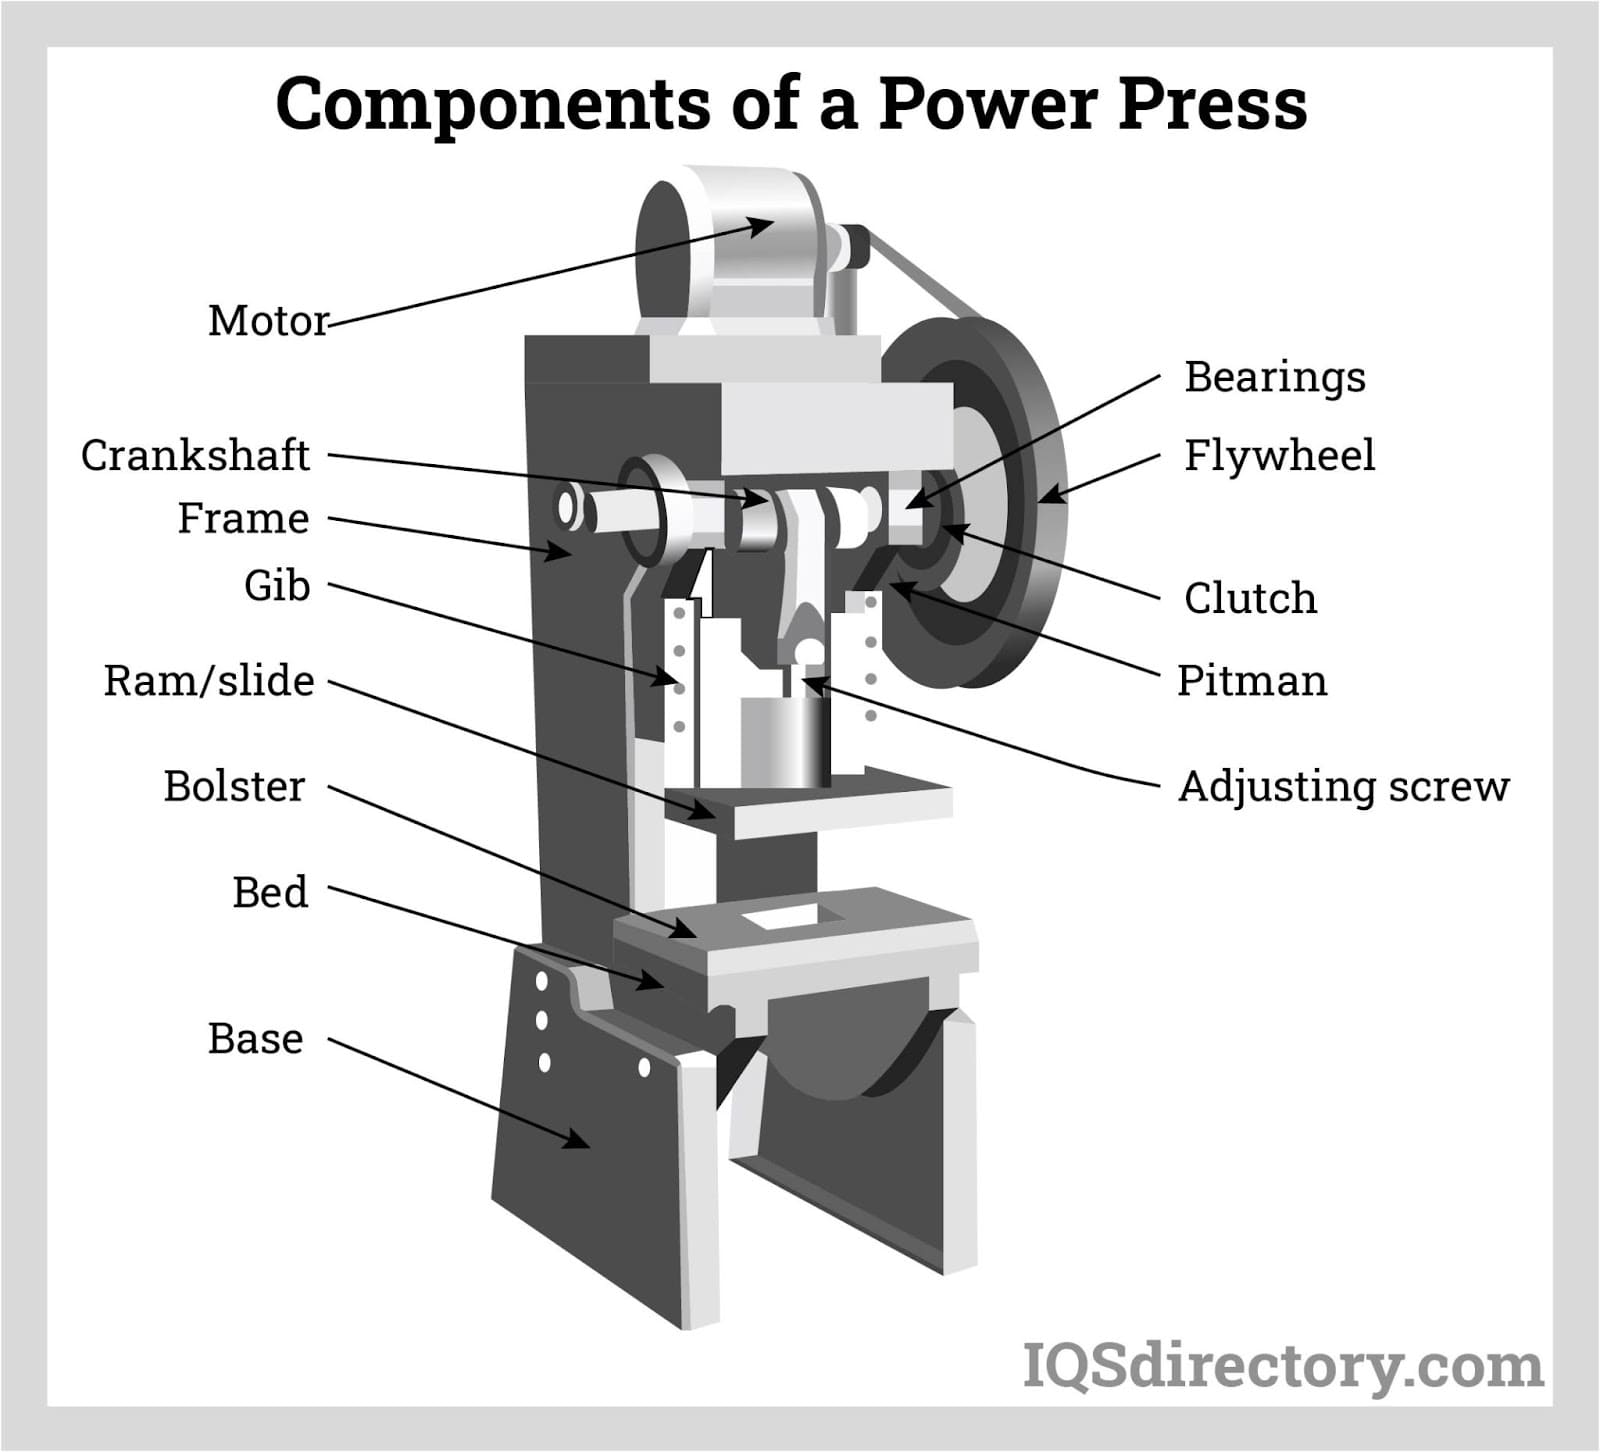 Power Presses: Types, Applications, Benefits, and Safety